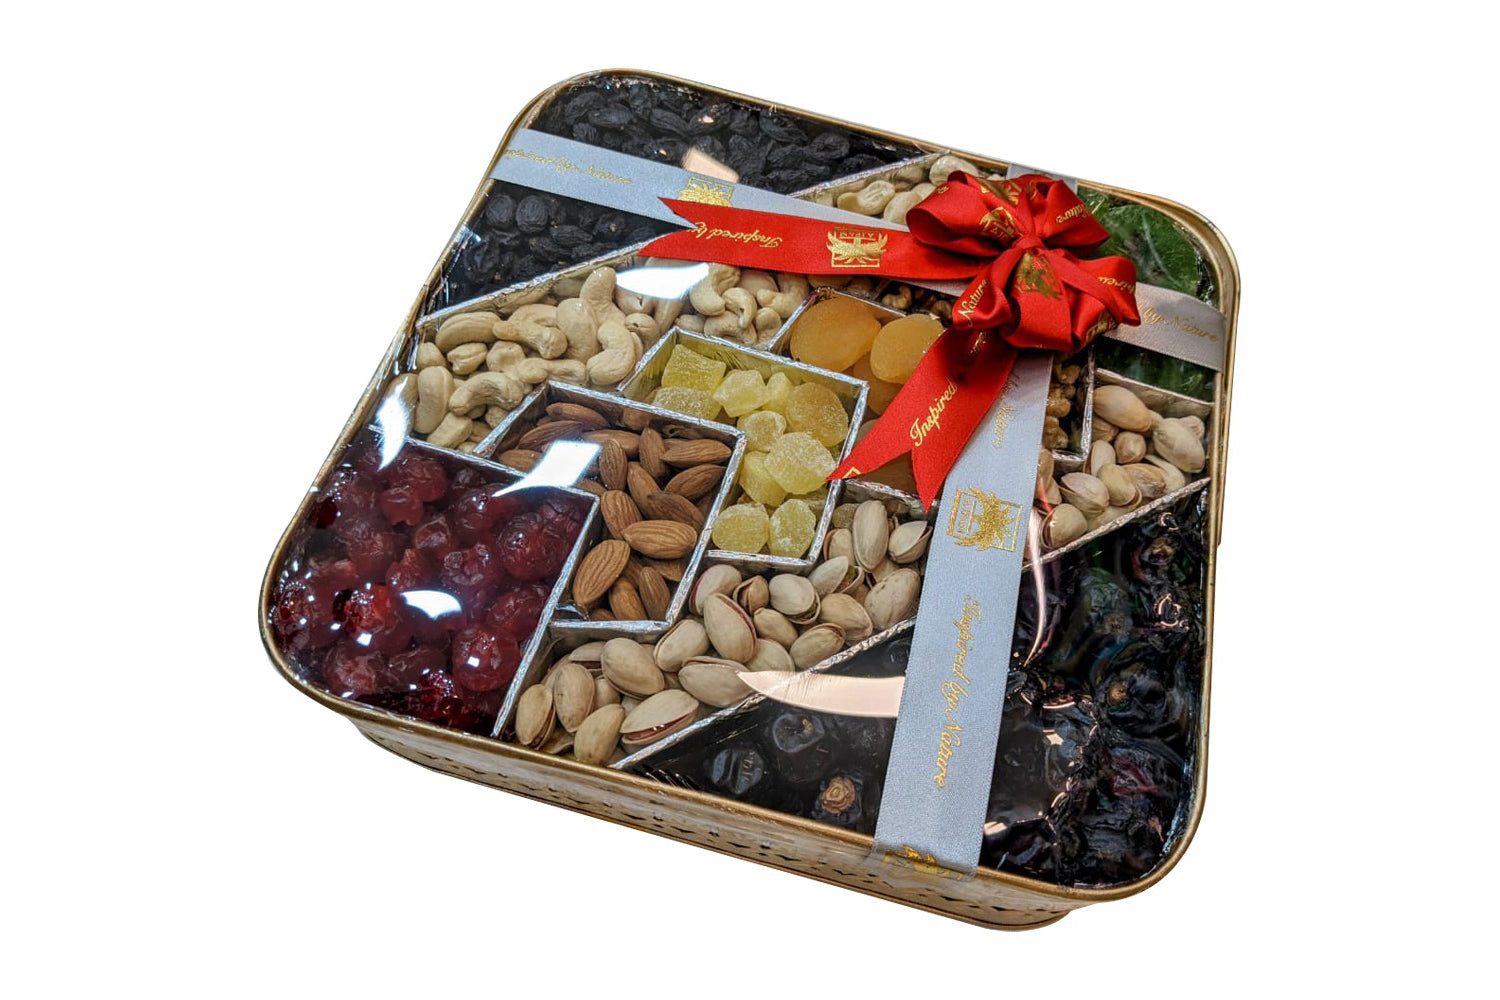 Sympathy Fruit and Nut Gift Collection at Gift Baskets Etc